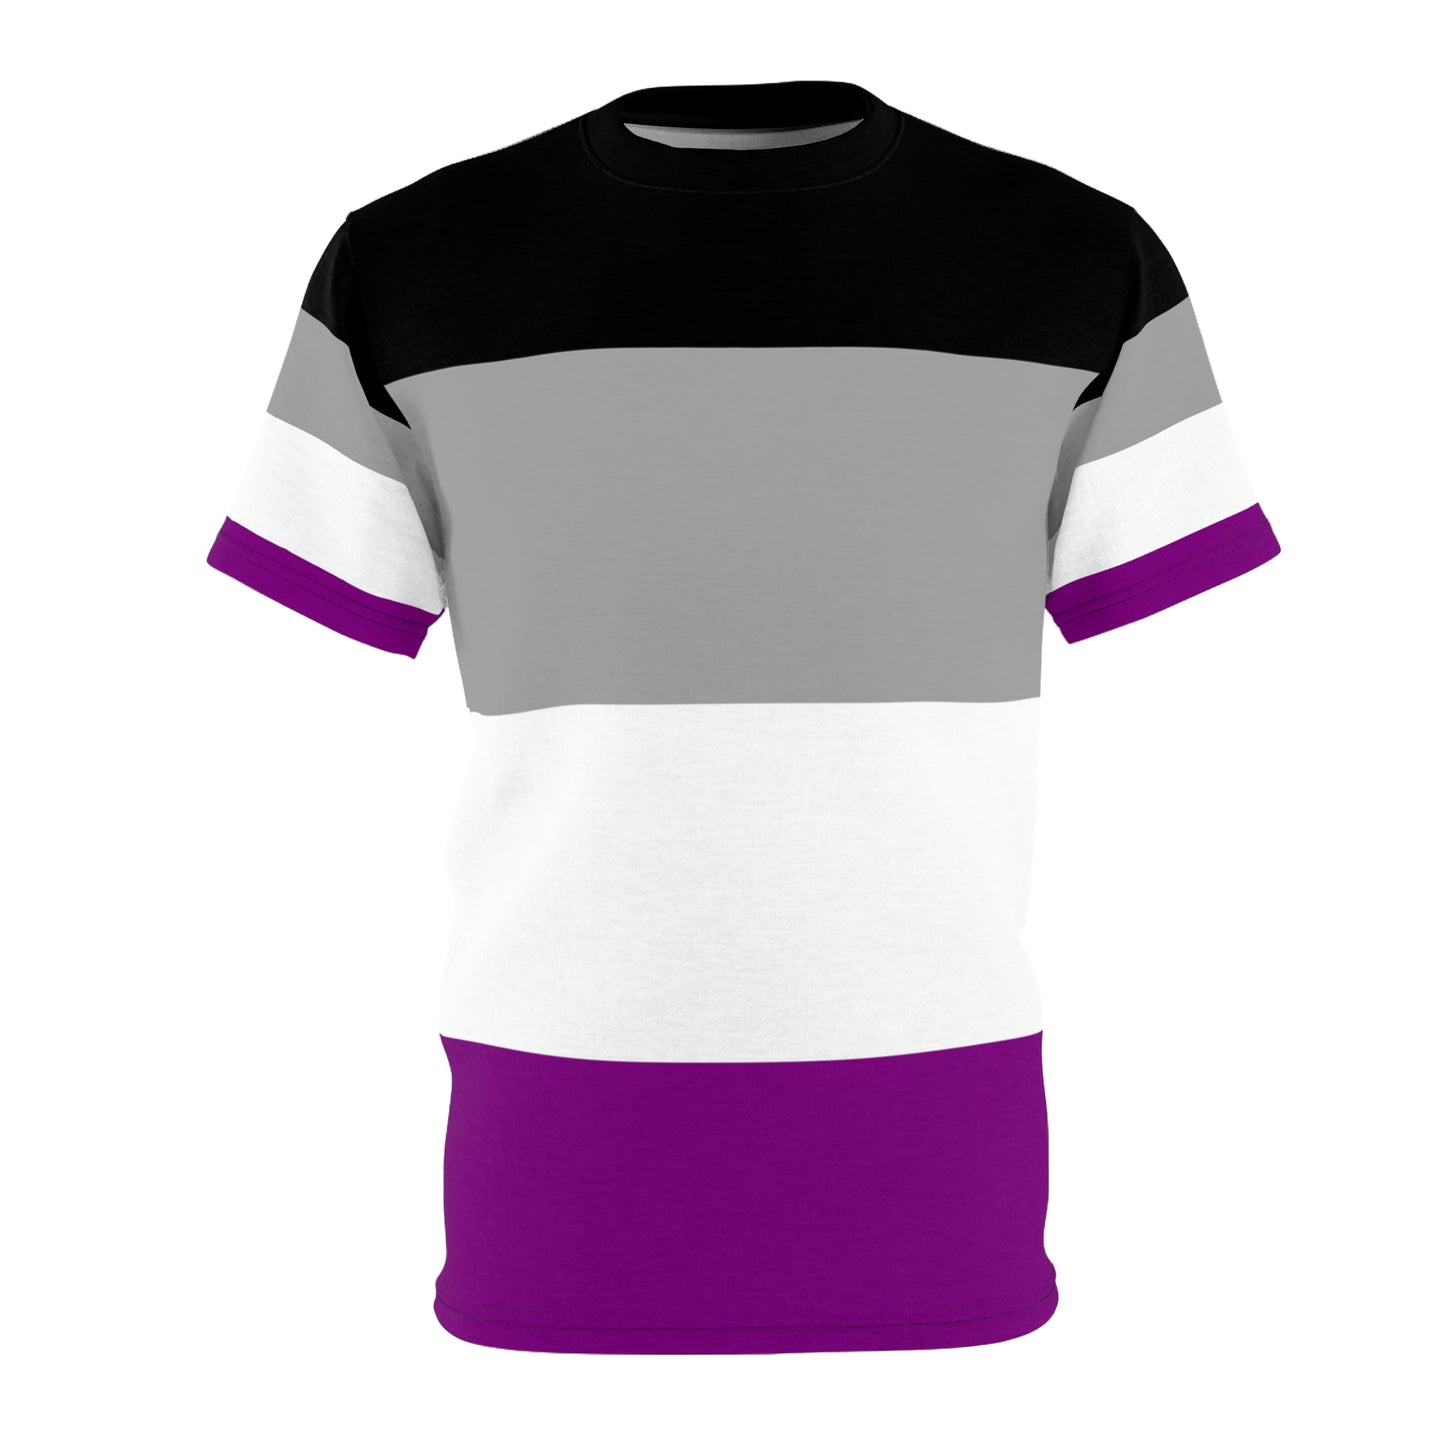 Asexual Pride Unisex T-Shirt